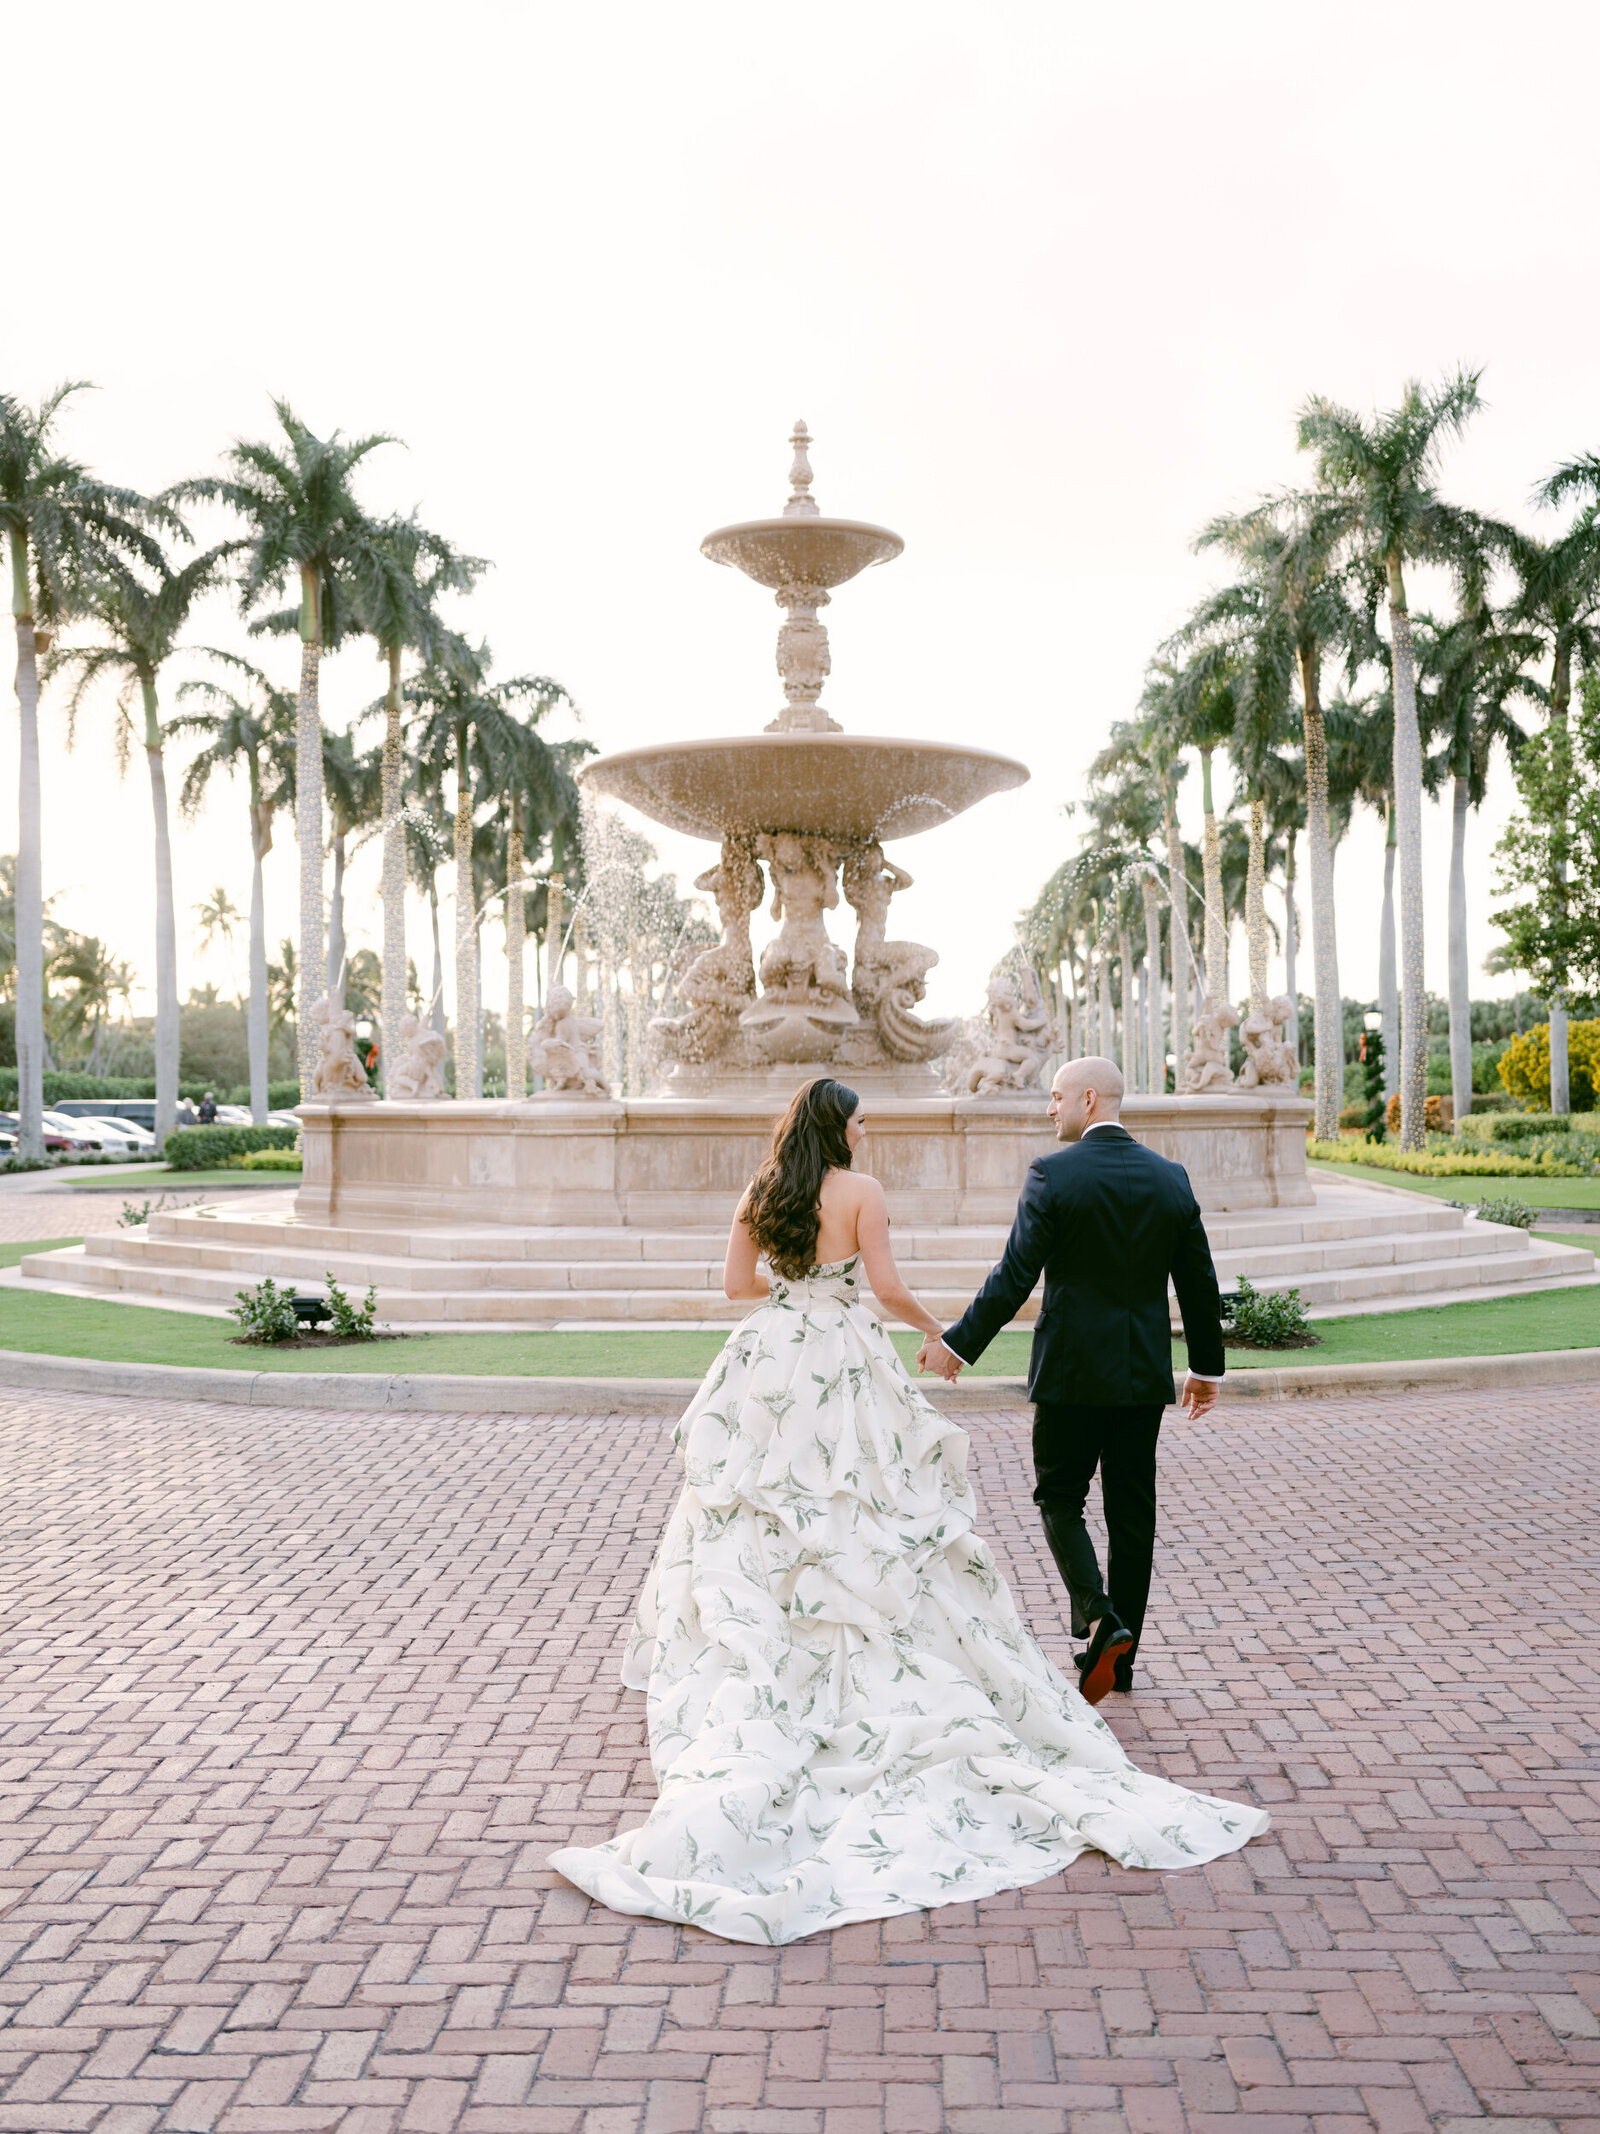 the-breakers-palm-beach-monique-lhuillier-bride-guerdy-design-renny-and-reed-the-new-york-times-BAZAAR-brides-Little-Black-Book-harpers-BAZAAR-A-Top-Wedding-Photographer-in-the-World-judith-rae-0316